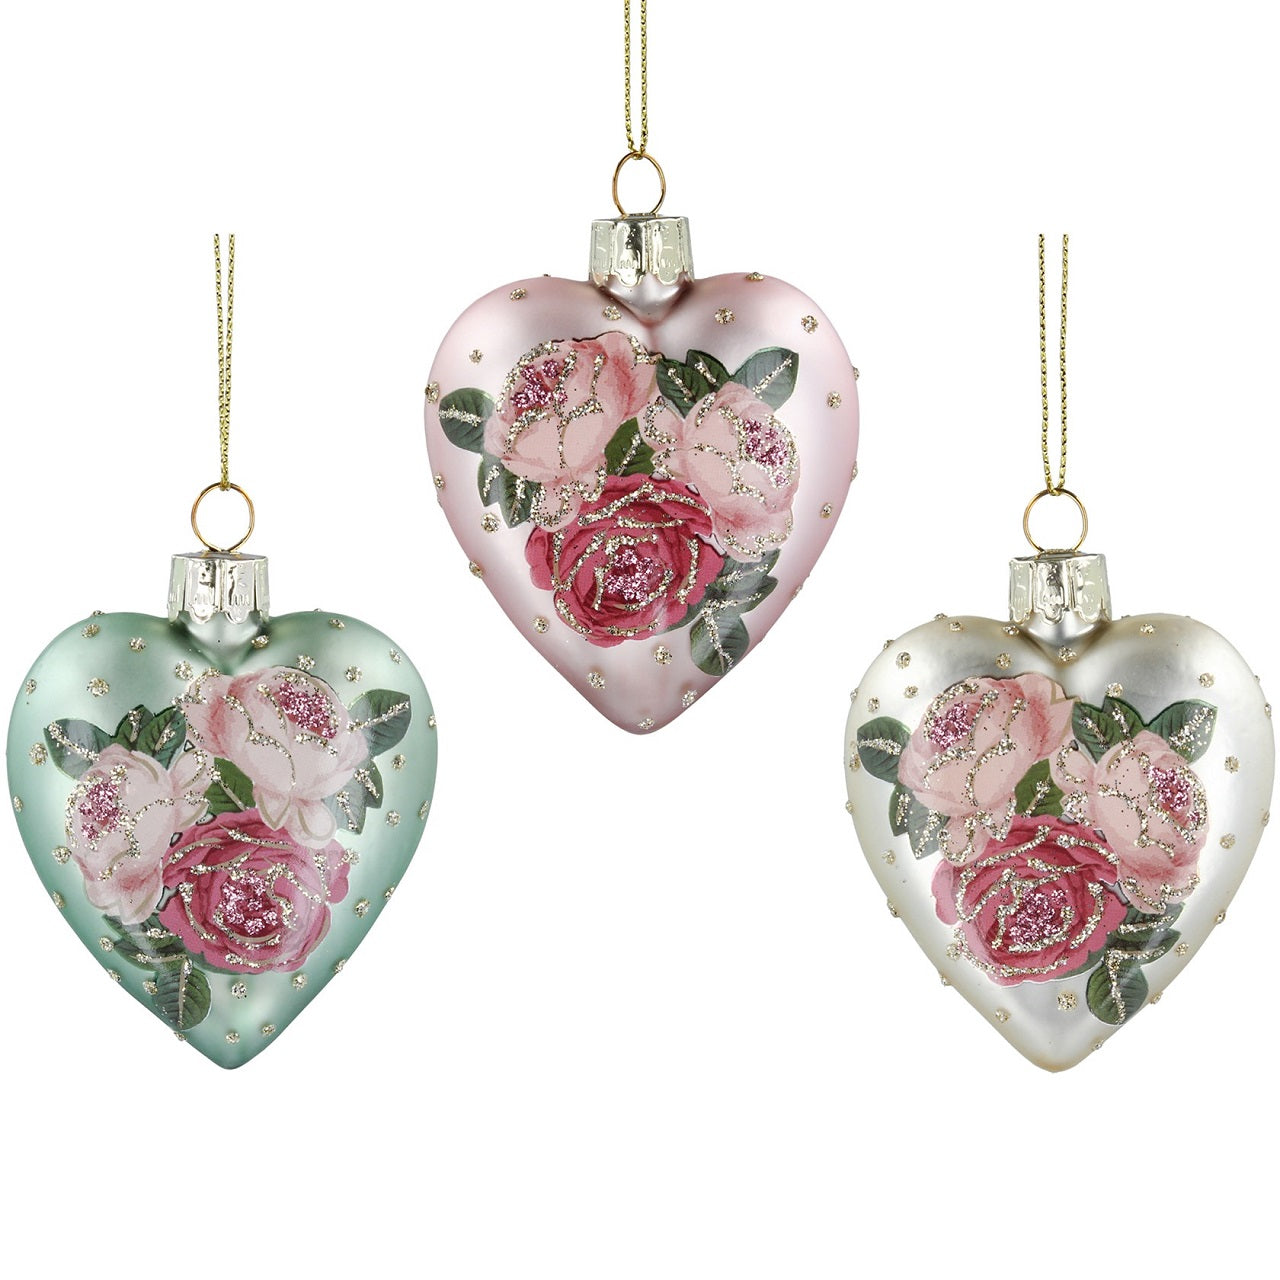 Pink Roses Heart-Shaped Christmas Hanging Decoration - Pink  Browse our beautiful range of luxury Christmas tree decorations and ornaments for your tree this Christmas.  Add style to your Christmas tree with this elegant glittering heart-shaped hanging ornament with pink roses.